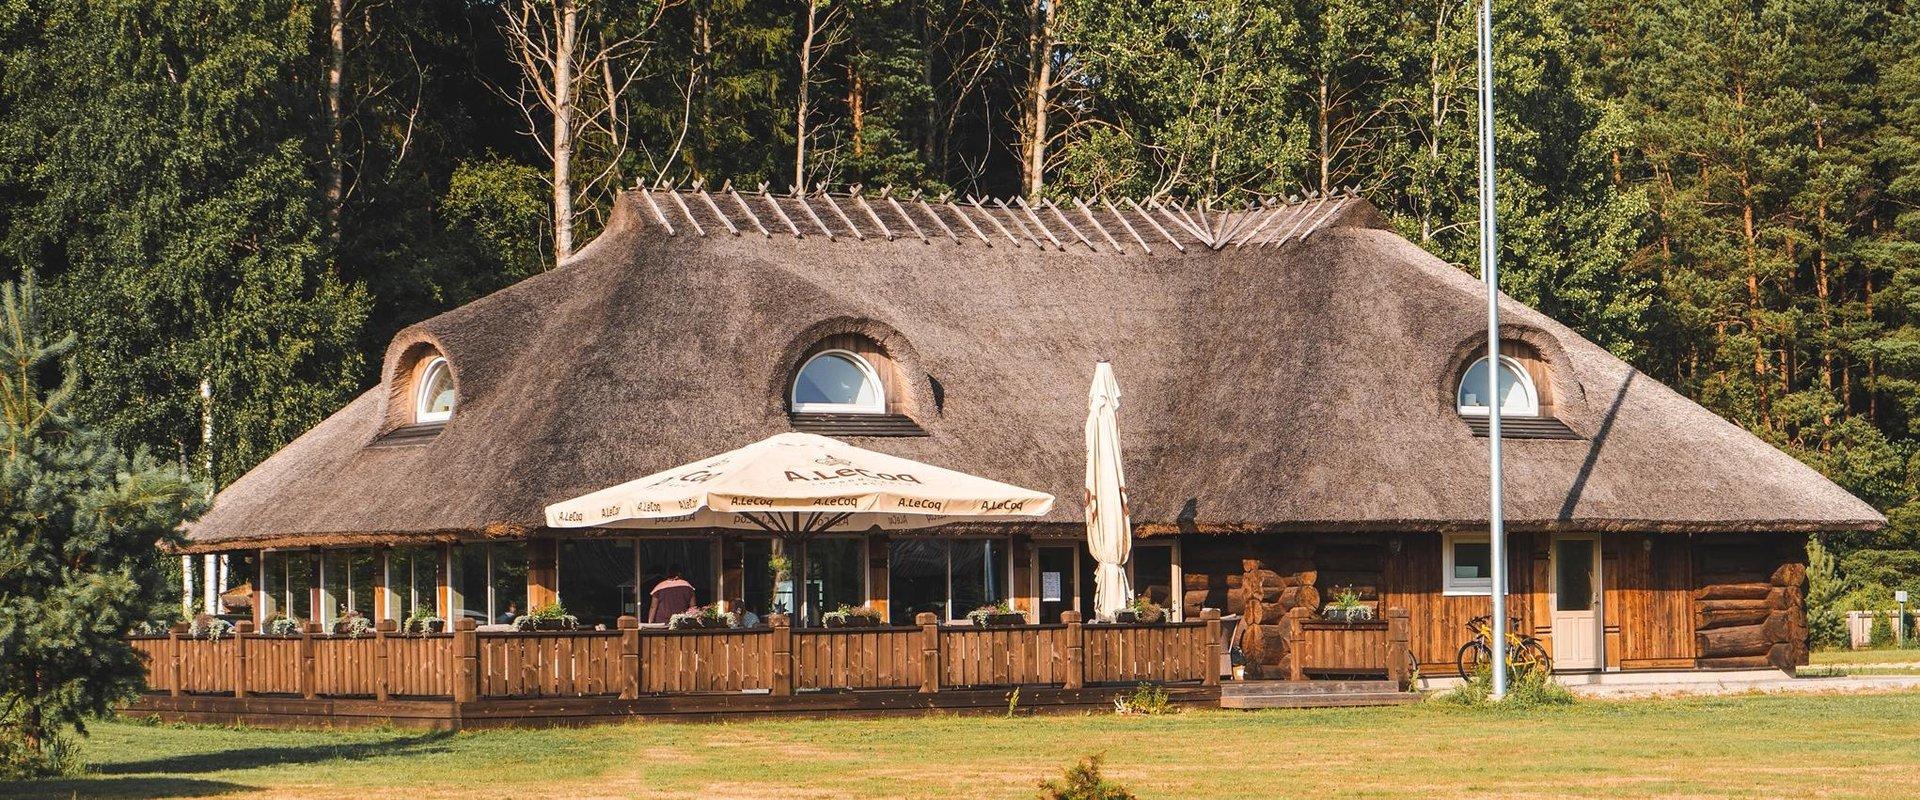 Metsaluige campsite is located next to Kabli village in Pärnu County. There is a sandy beach a few hundred metres from the campsite and a pine forest 